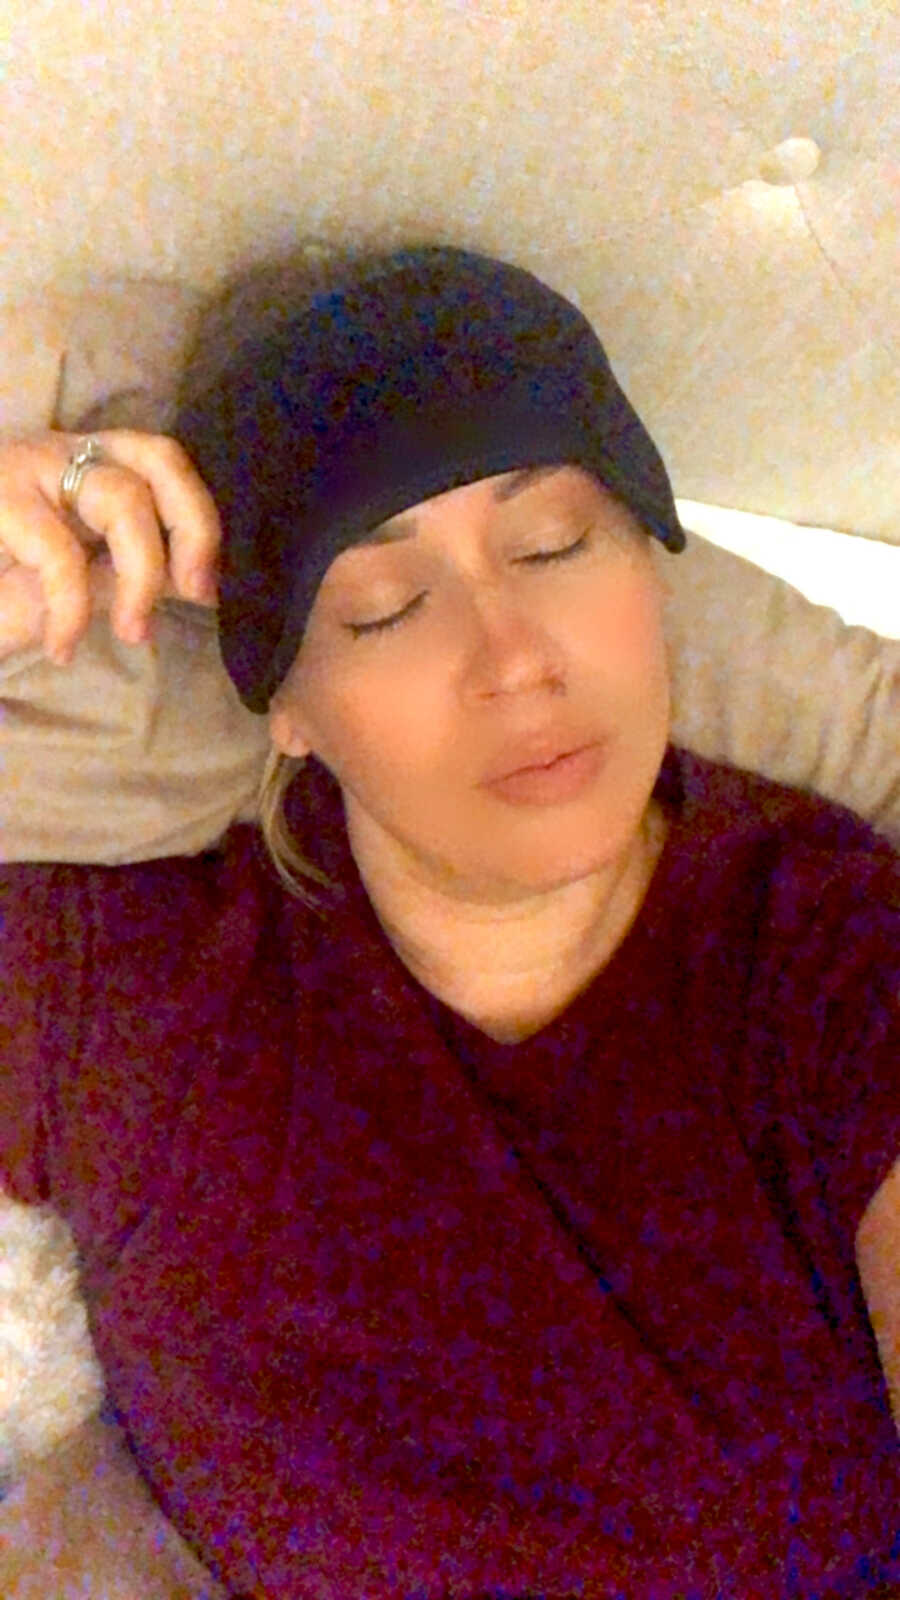 woman with chronic illness lays down with cool pack on head